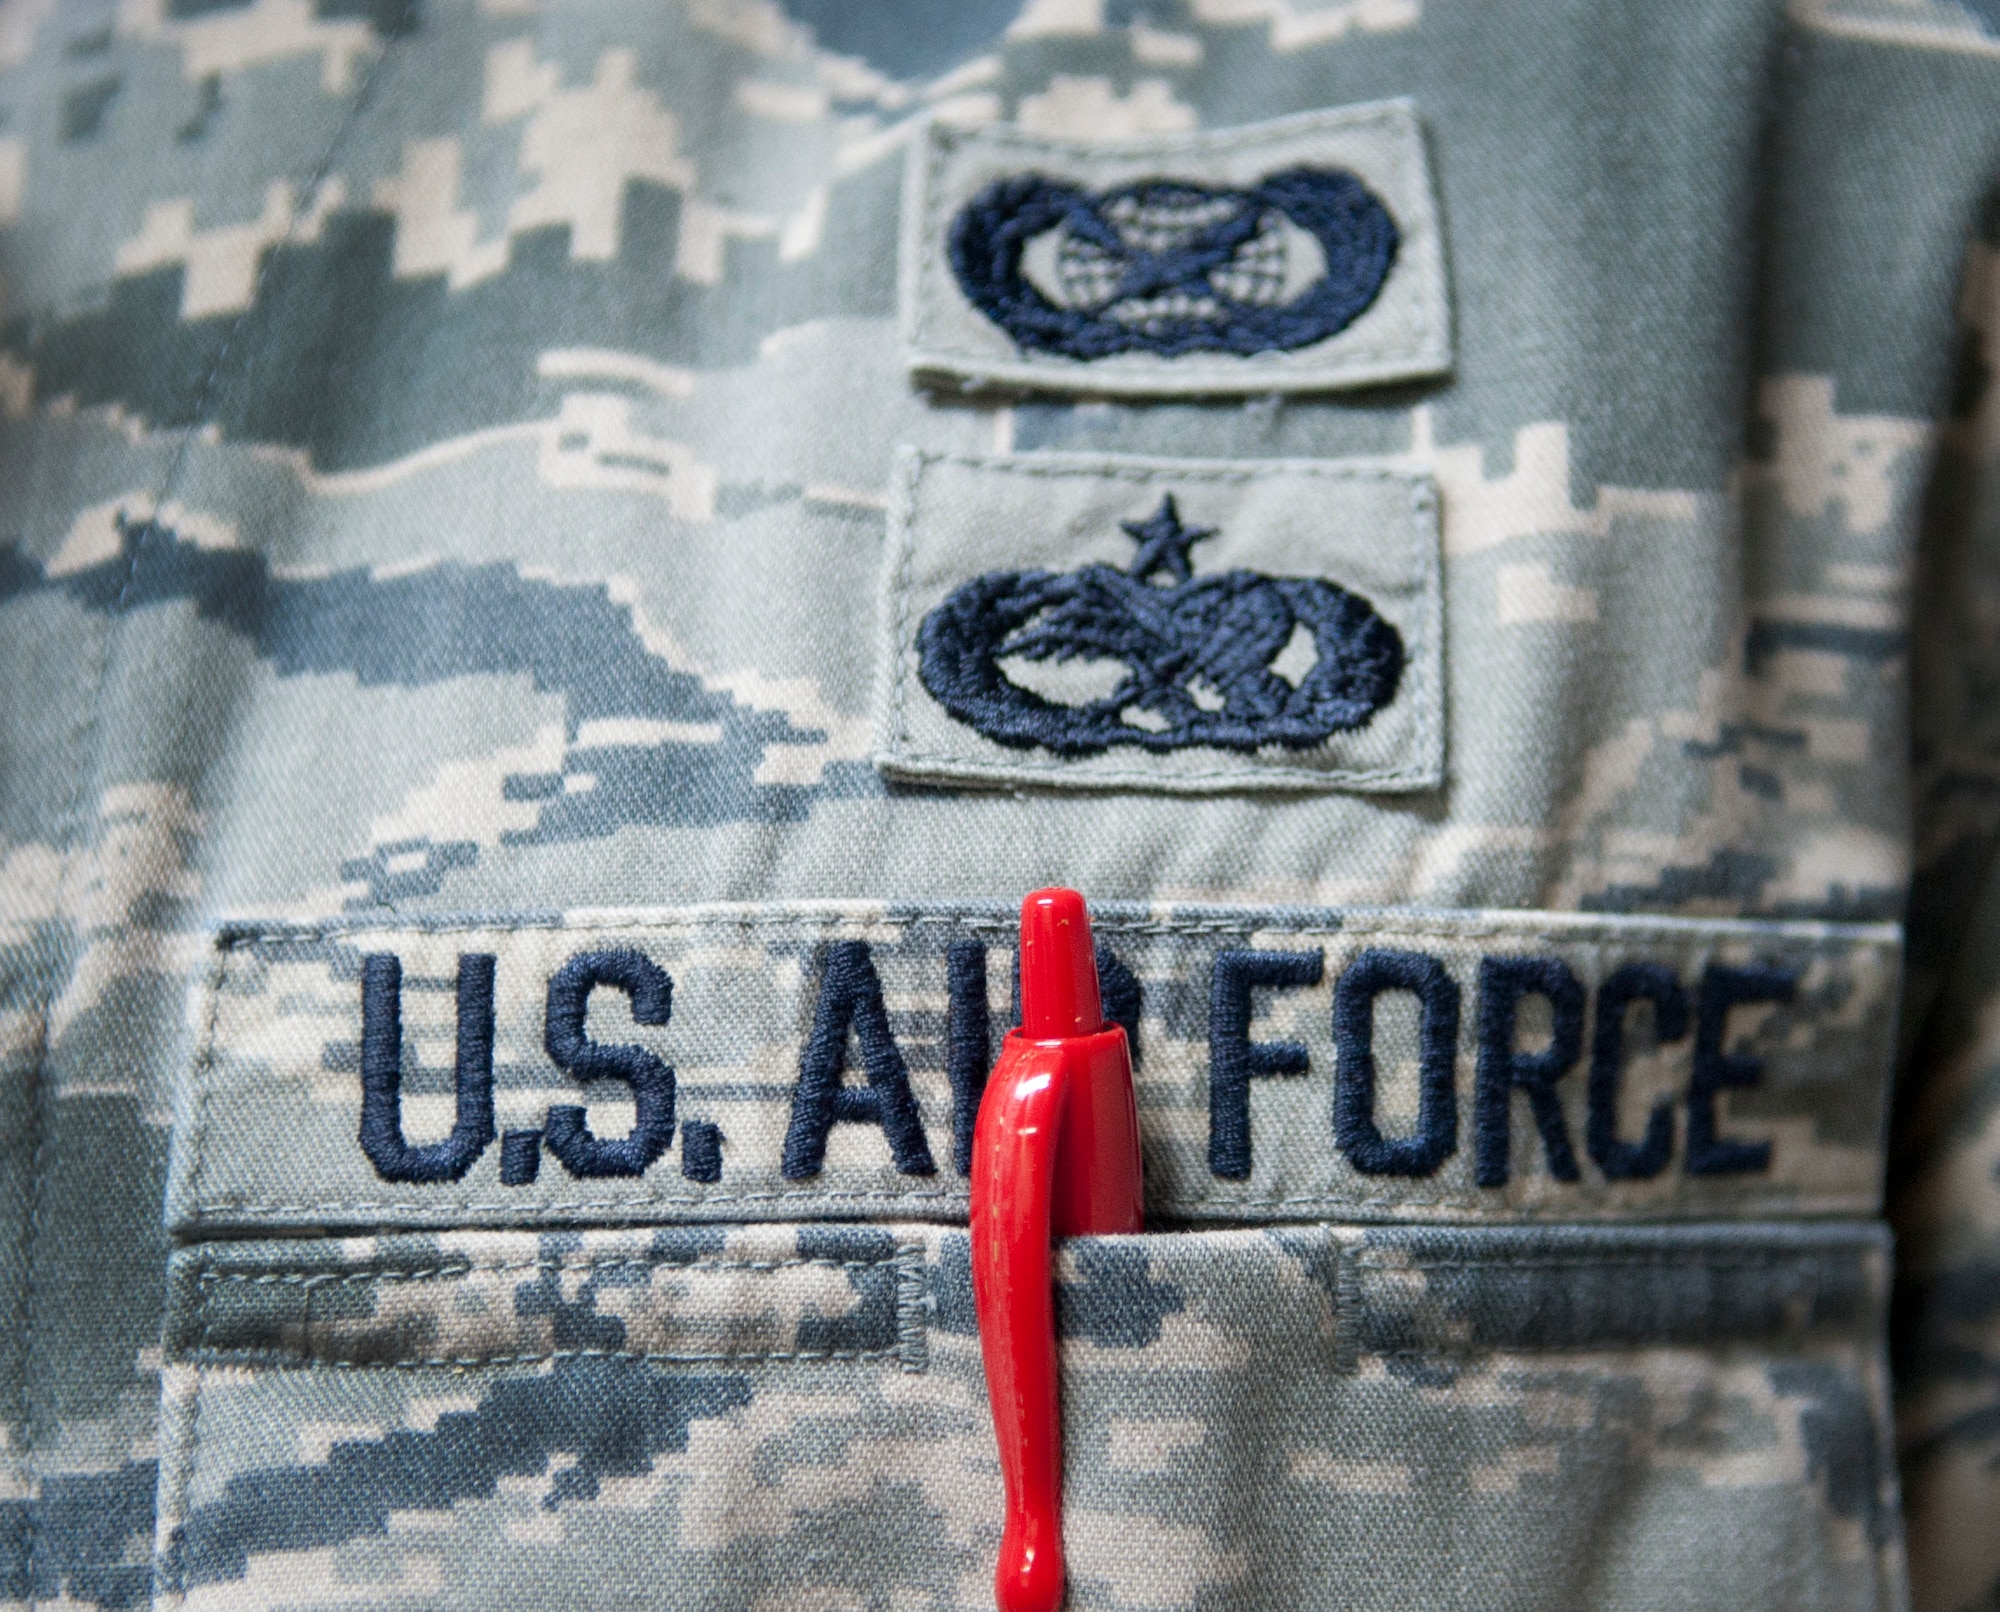 Though red pens are often seen as leaving negative remarks on one's career, they are in fact used as tools to help better Airmen. From fixing aircraft to correcting papers, each stroke makes a mark in pursuing excellence. (U.S. Air Force photo by Senior Airman Daniel Phelps/Released)